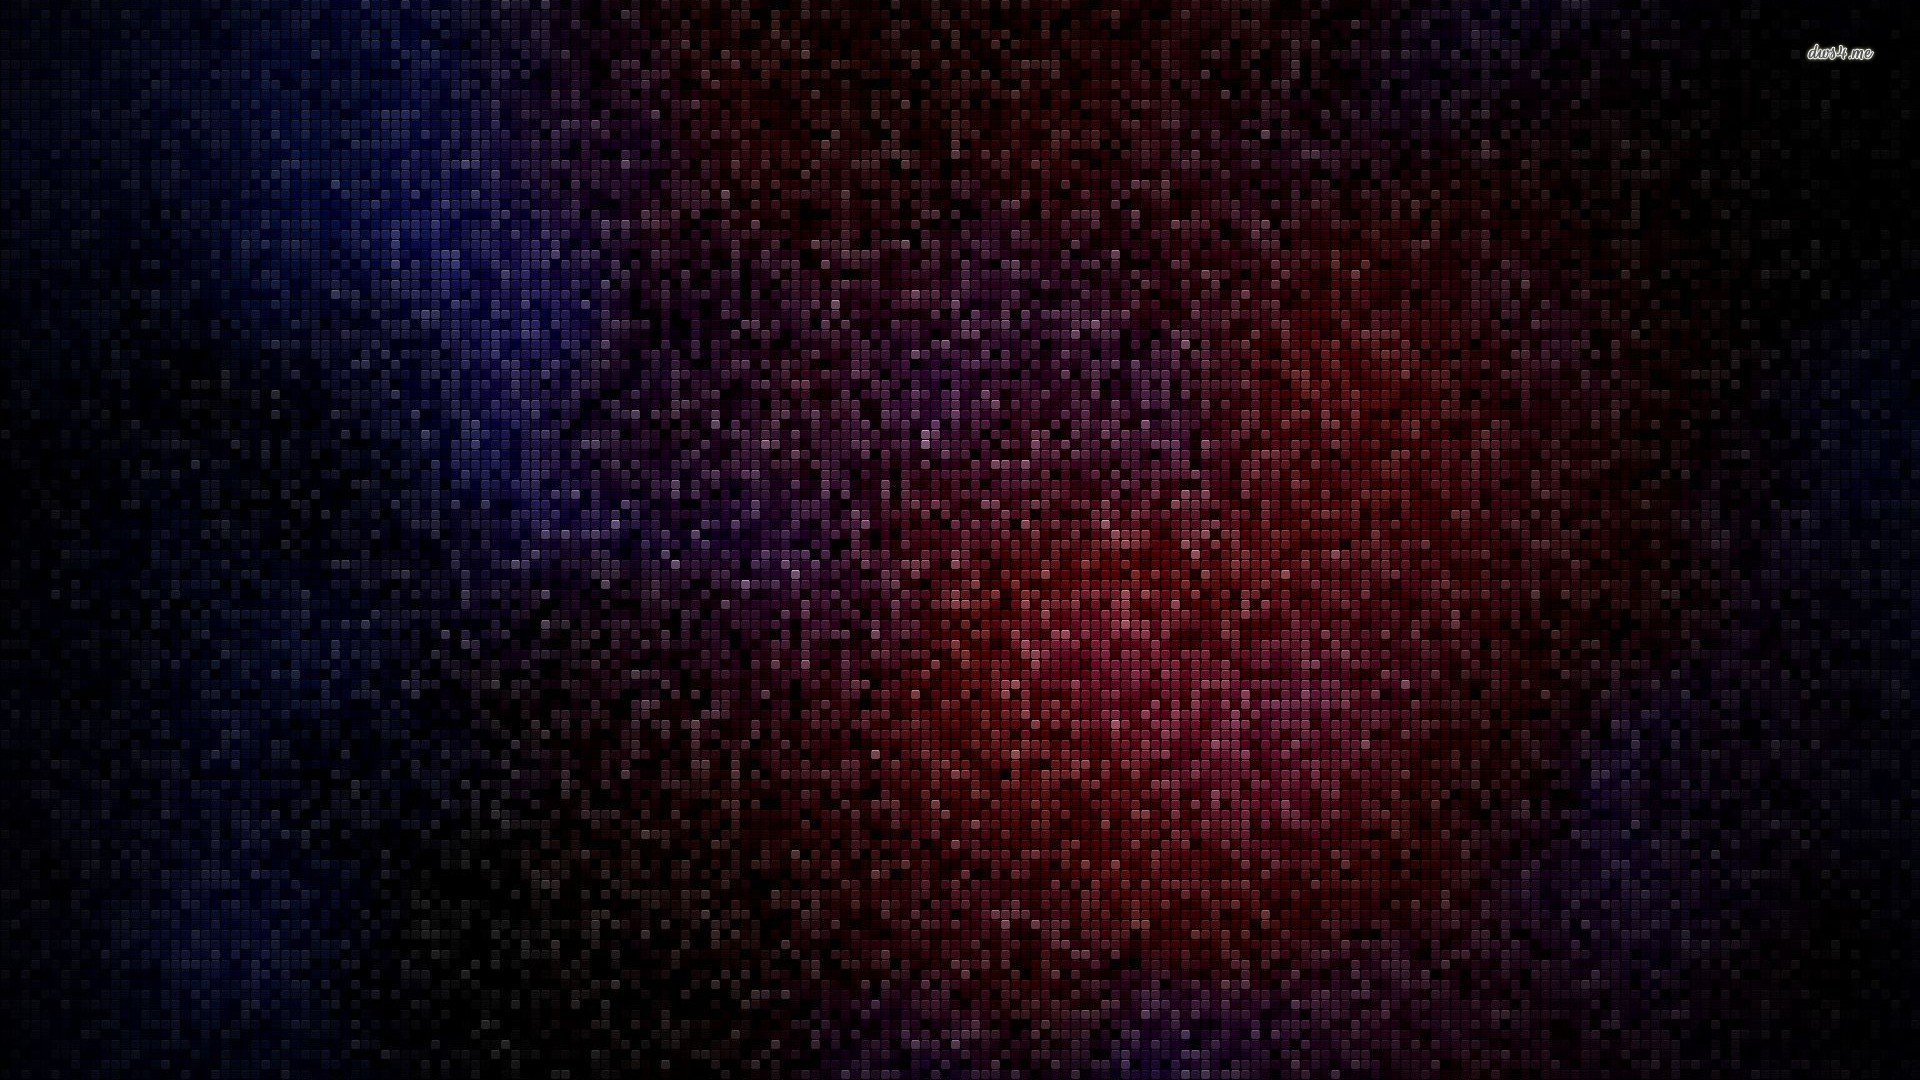 Red and purple mosaic wallpaper - Abstract wallpapers - #21225